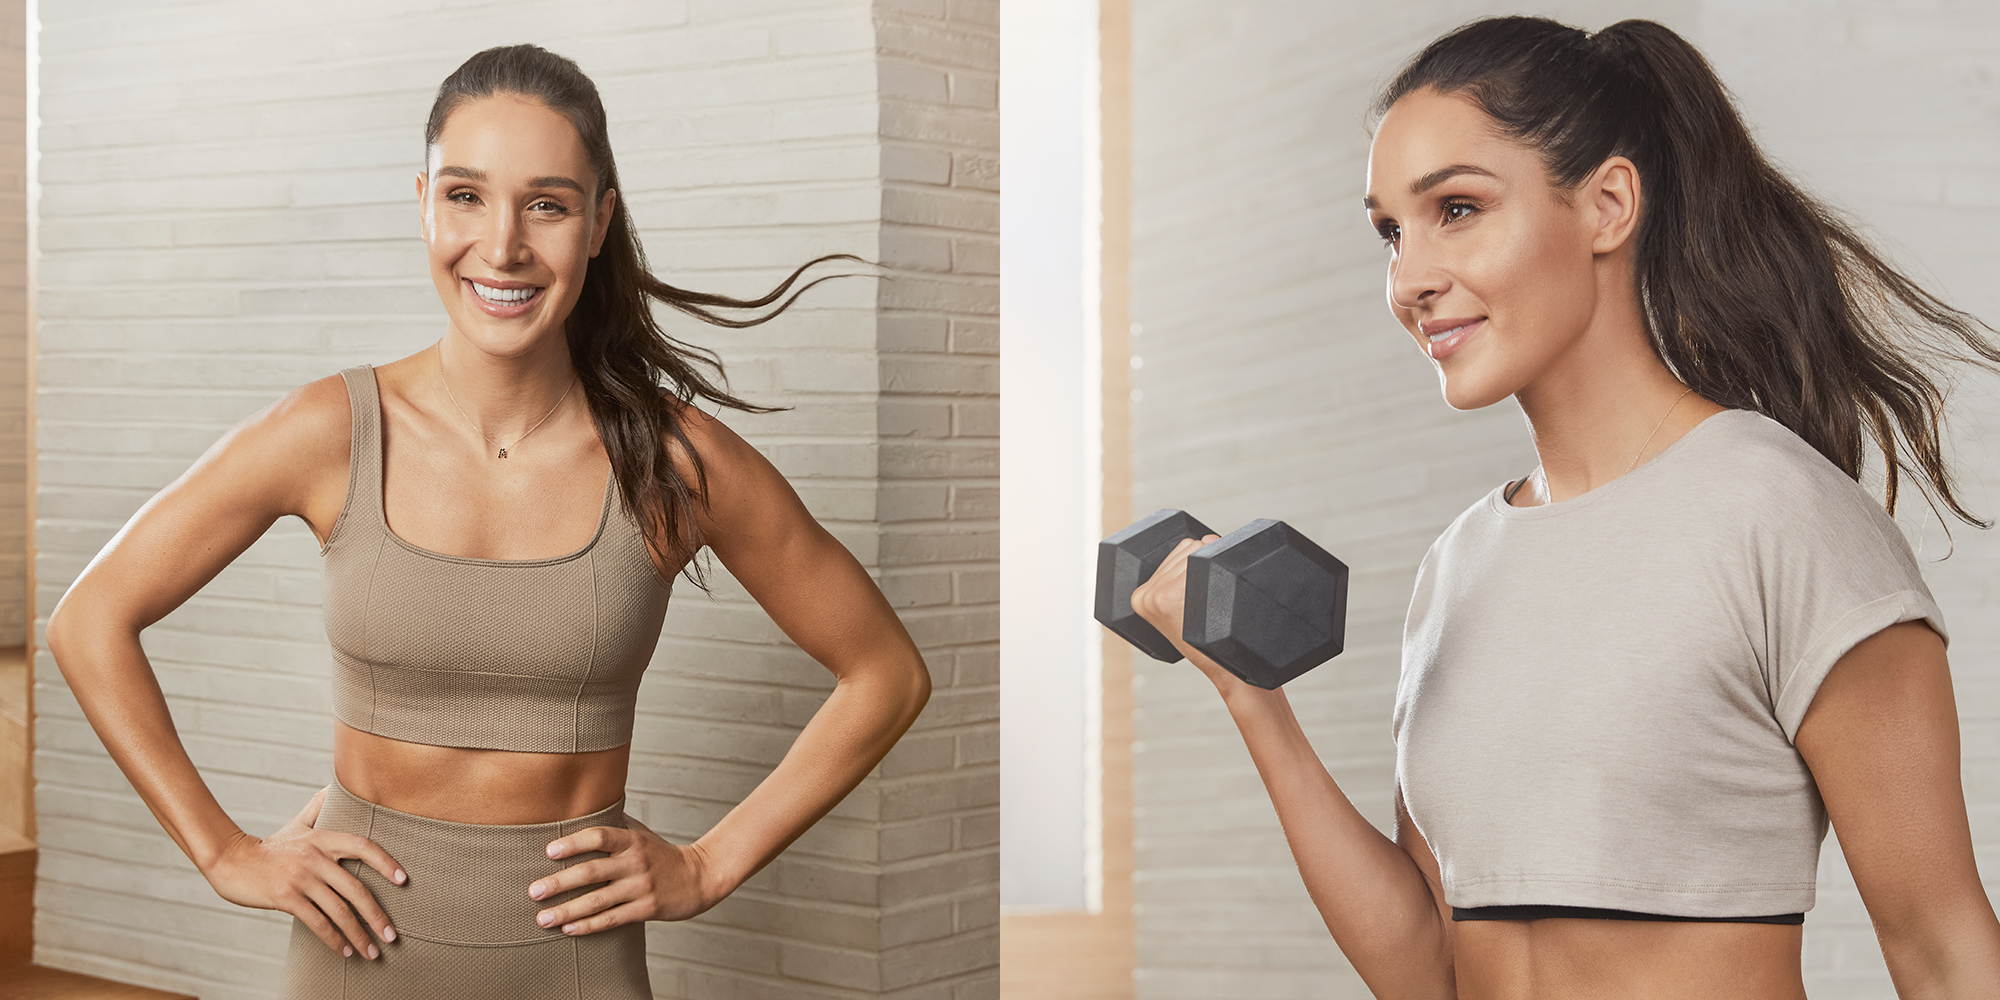 Sexy Arm Workout 2021— Get Crazy-Toned Arms in 15 Minutes